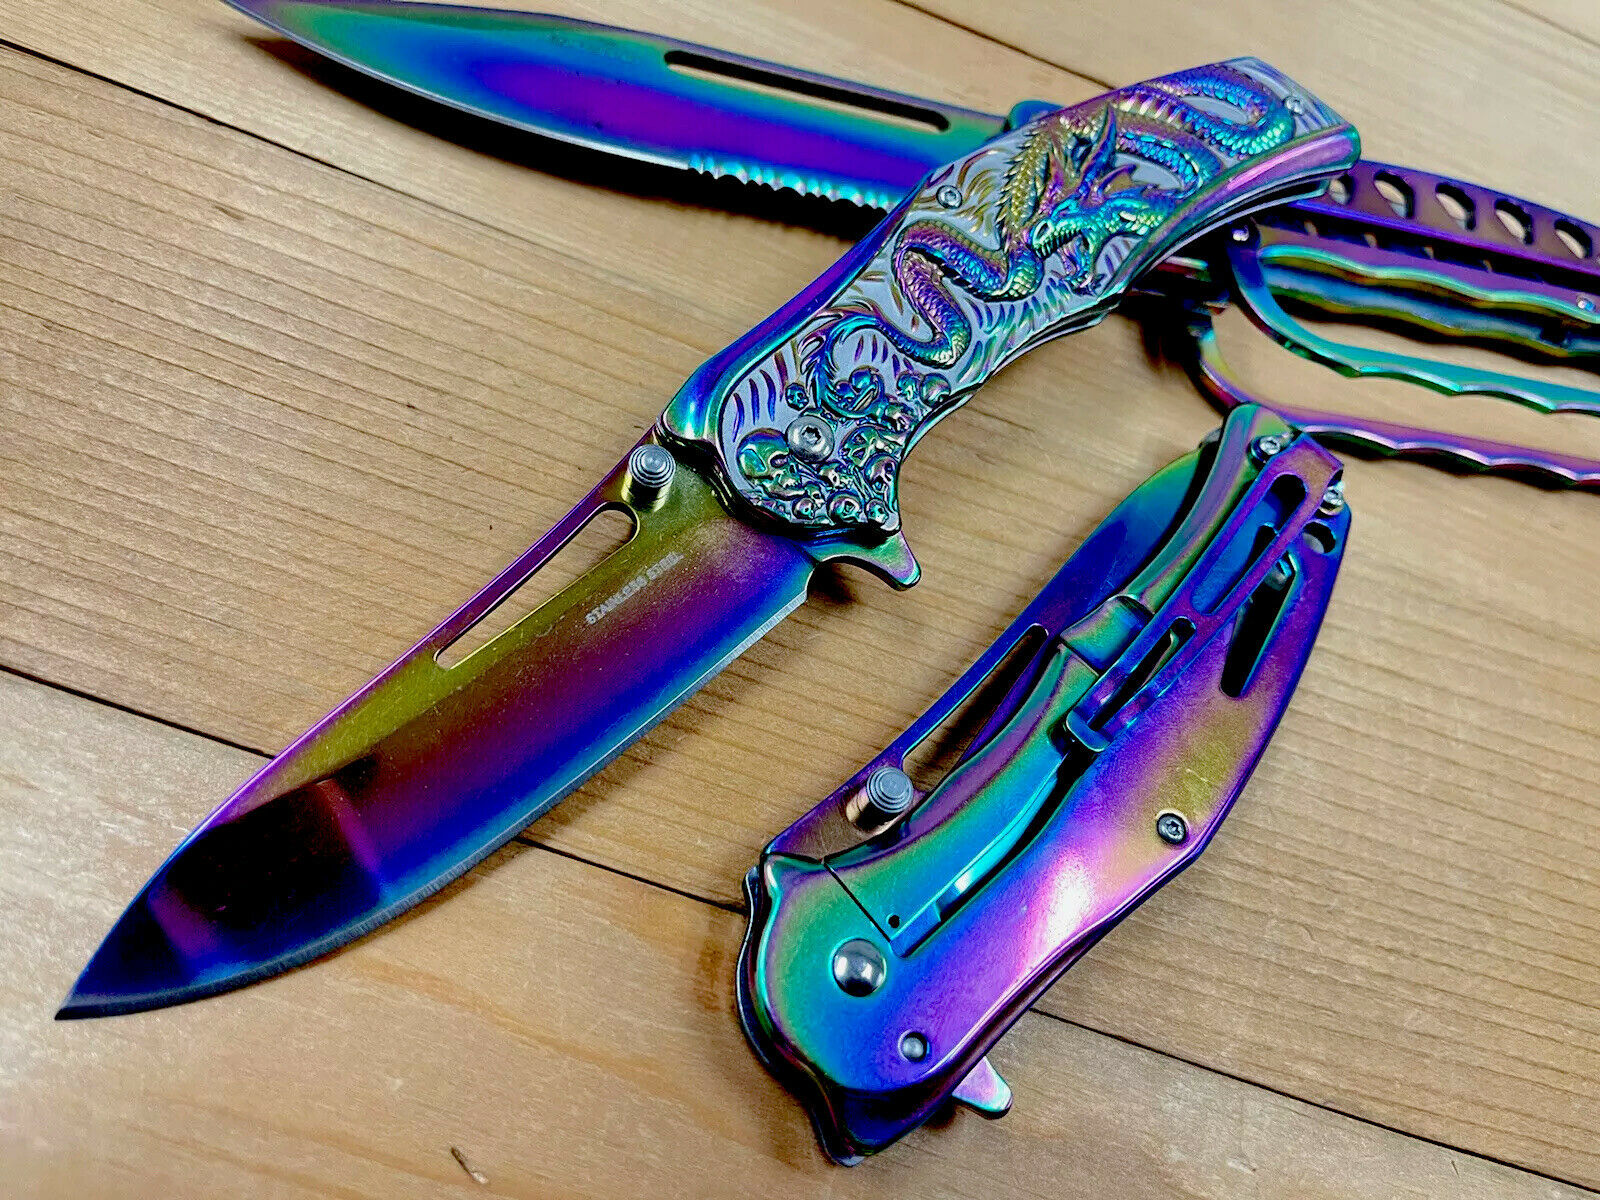 US$ 30.95 - 8.75” Luxury Spring Assisted Pocket Knife 3D Dragon Ball Fiery  Hunting Tactical Rainbow - www.city9inc.com